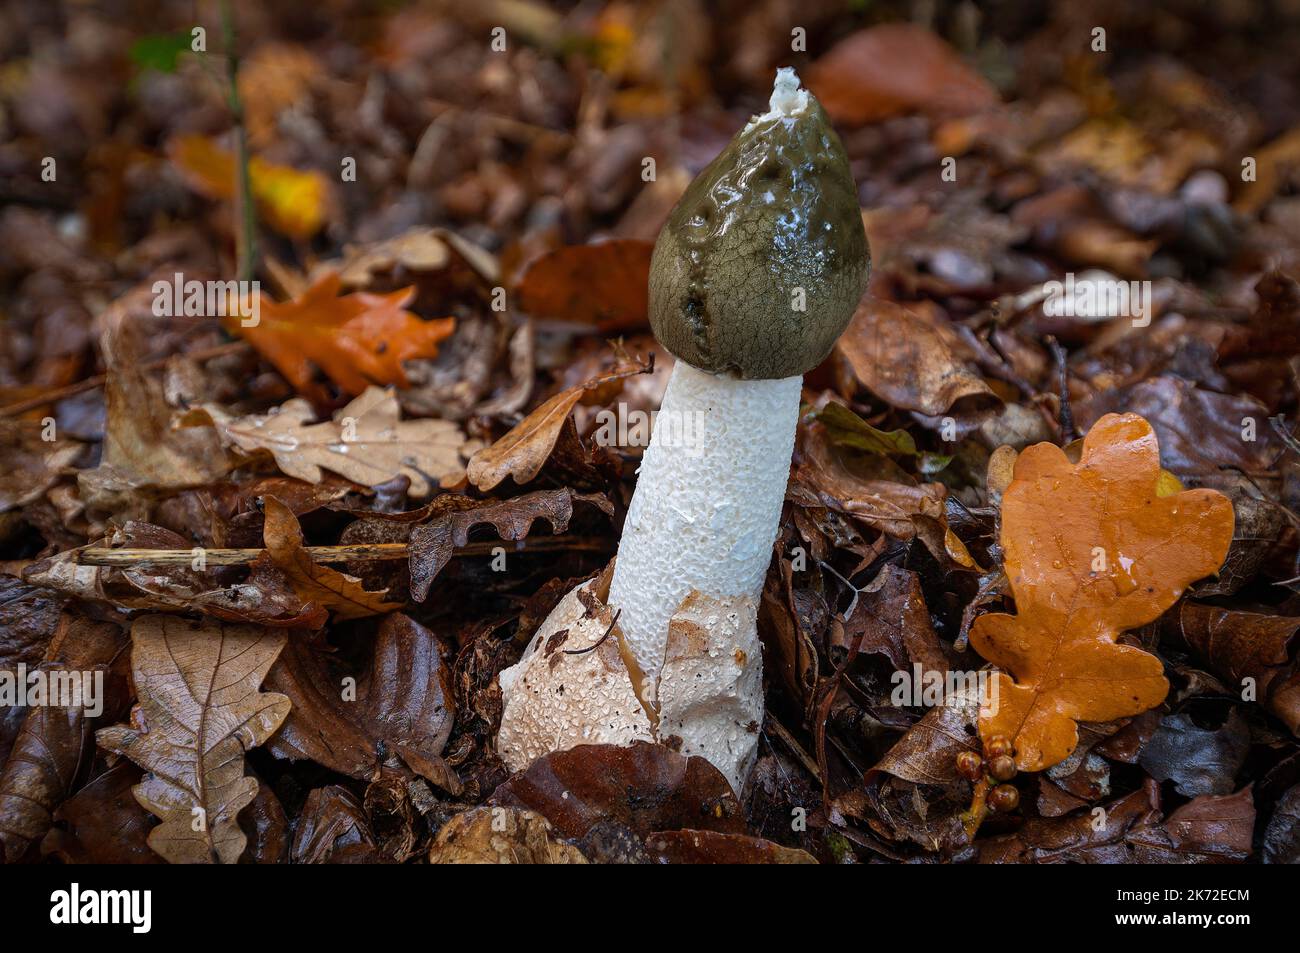 Phallus impudicus fungi also known as stinkhorn with spore gel dripping down the olive green cap and surounded by autumn oak leaves on the ground. Stock Photo